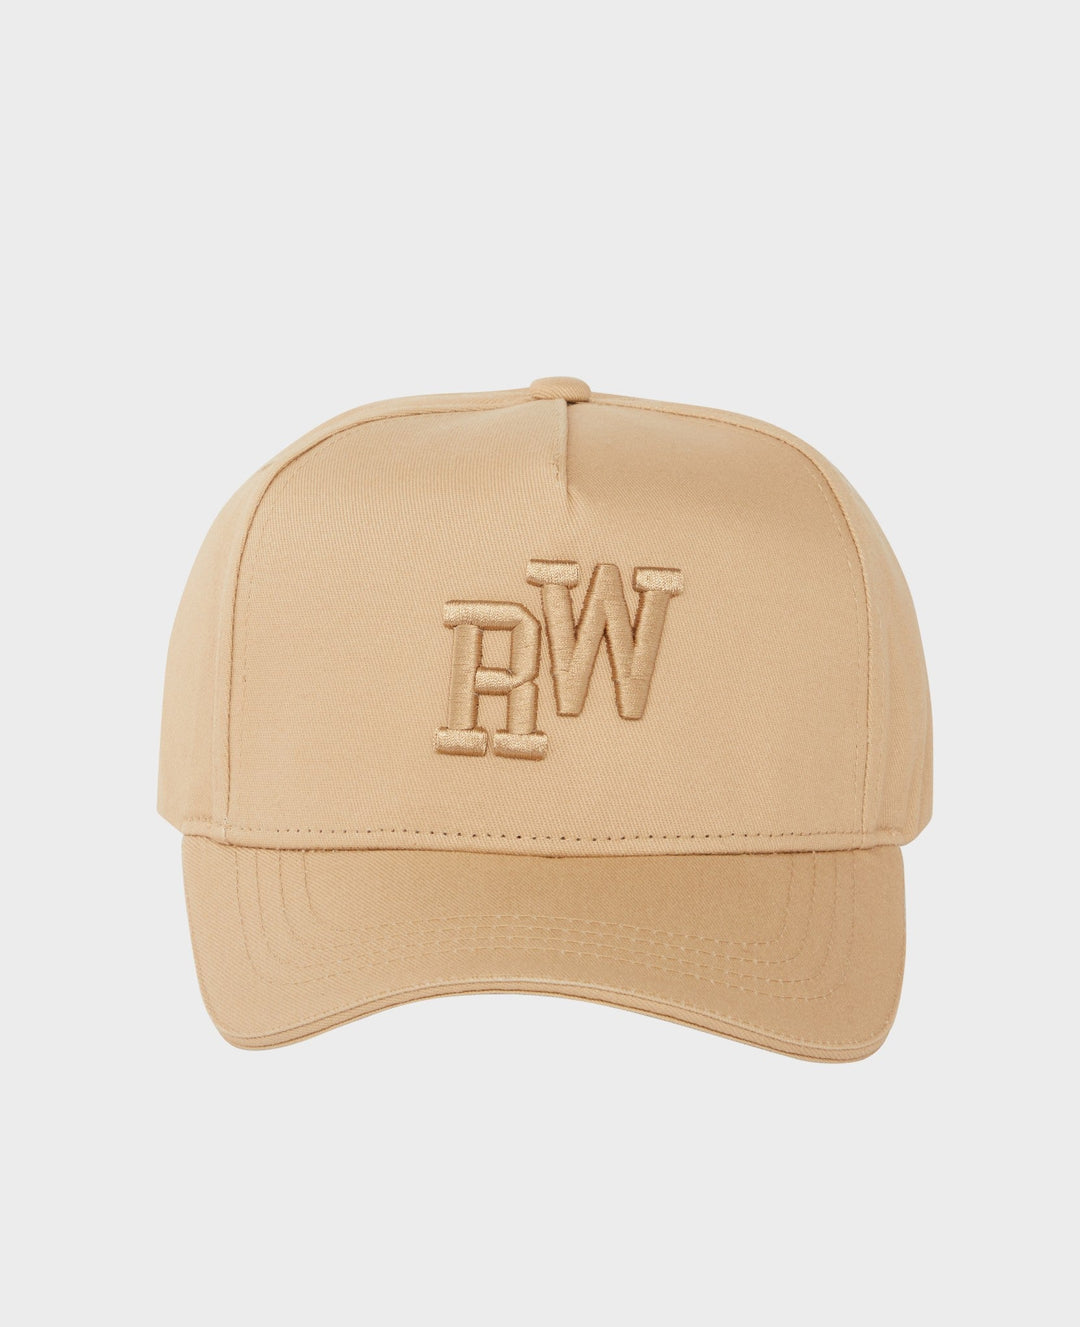 In timeless, neutral fawn, our 100% cotton baseball cap features an embossed logo on the front and back, adjustable rear strap and air vent eyelets so you can keep your cool while looking your best this season.